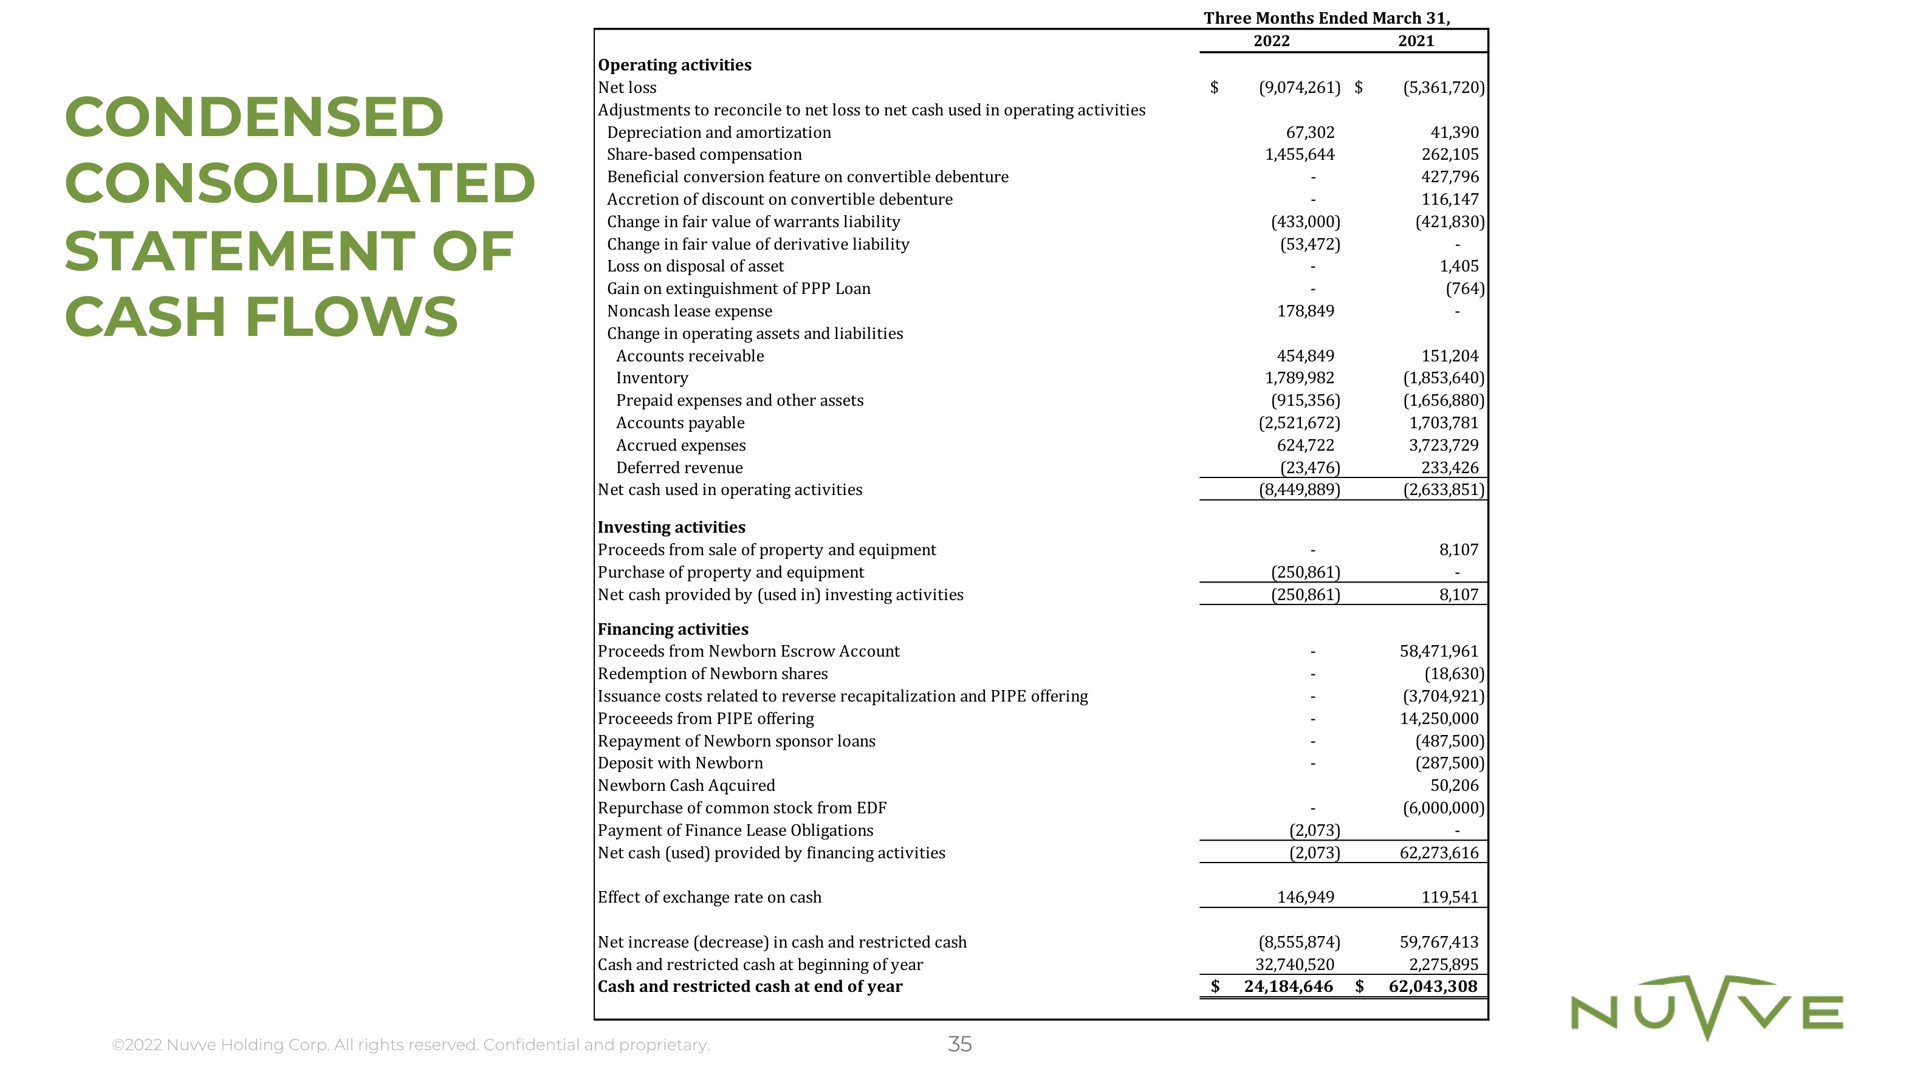 condensed consolidated statement of cash flows | Nuvve